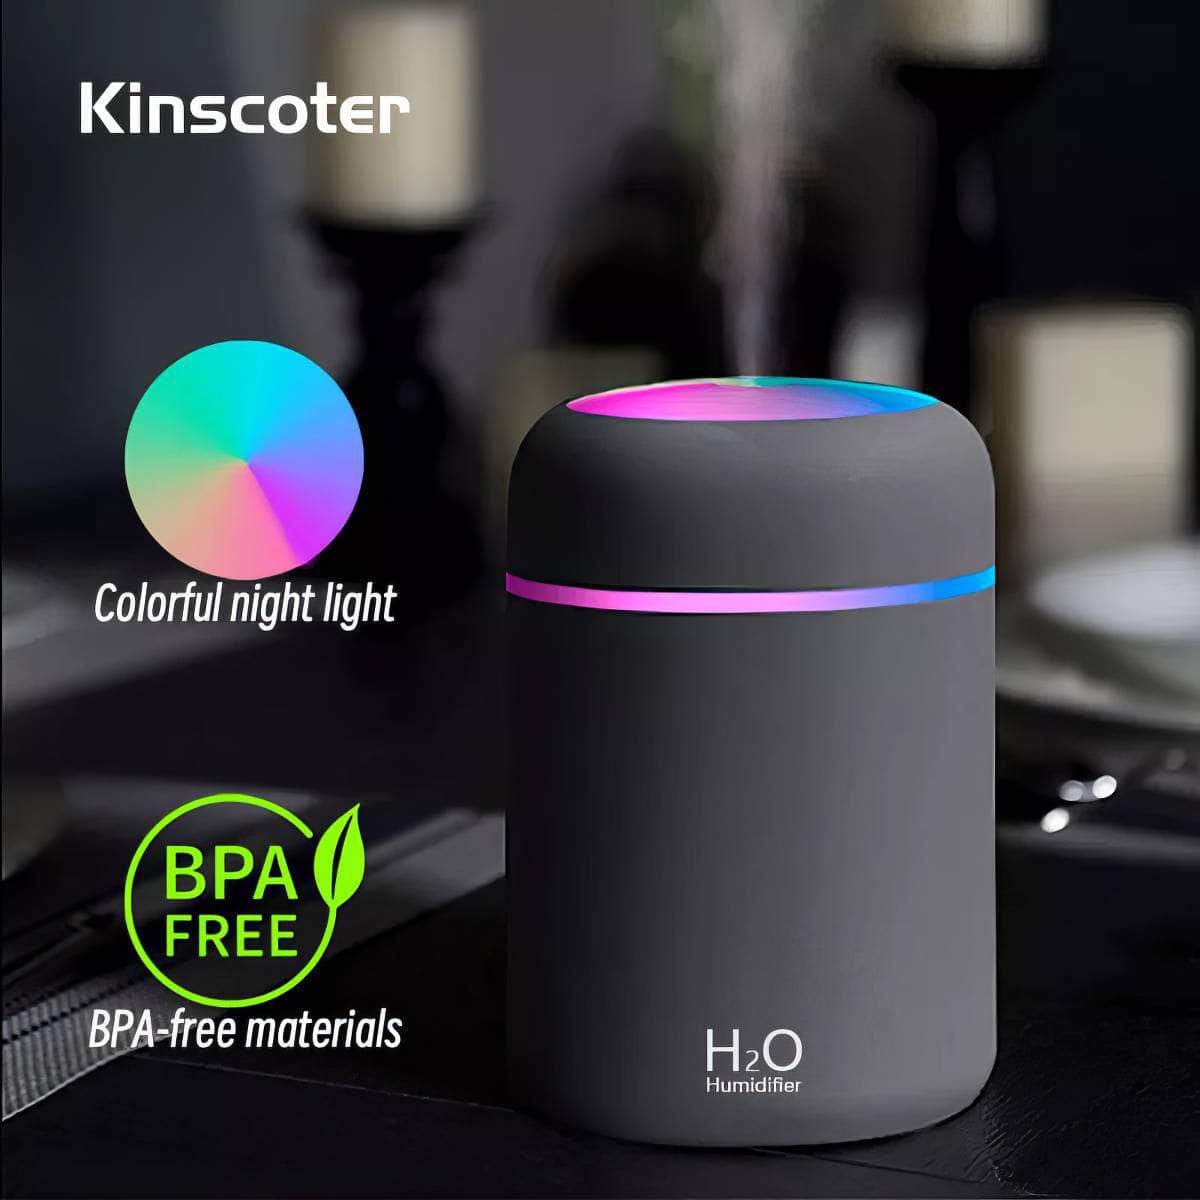 300ml Portable Mini USB Aroma Diffuser - Cool Mist Humidifier for Bedroom, Home, Car, Plants - H2O Air Purifier